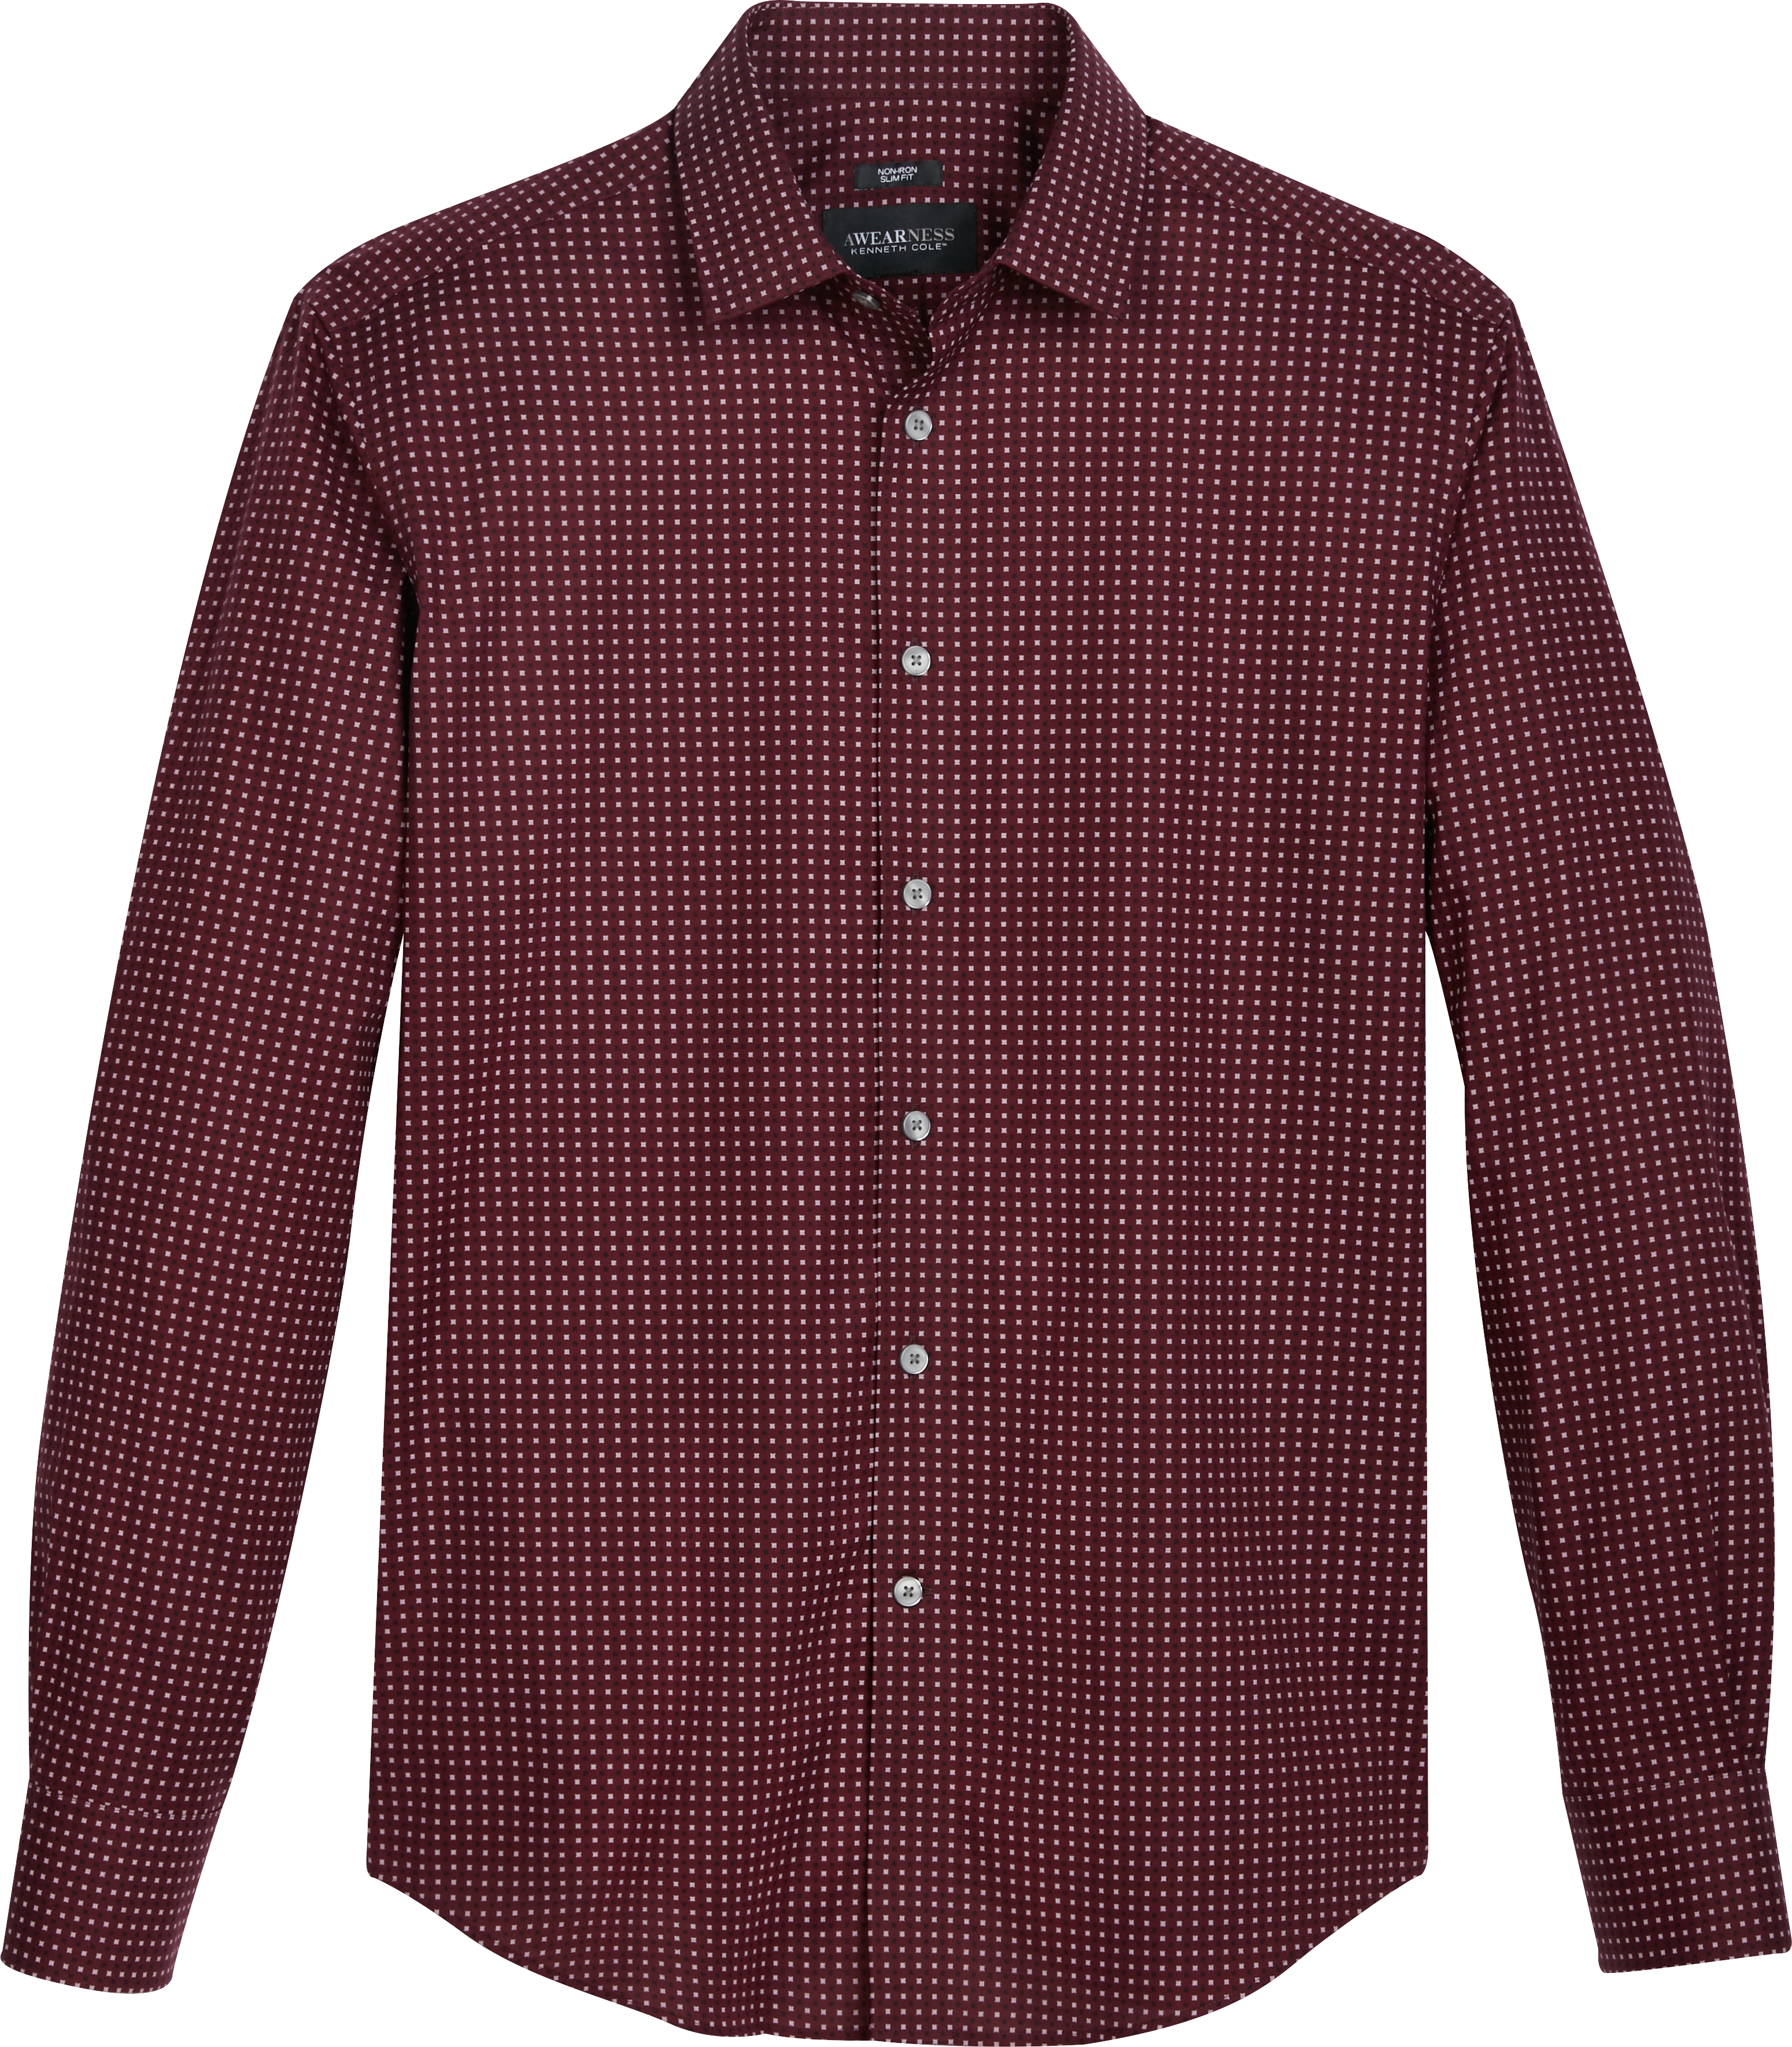 Awearness Kenneth Cole Slim Fit Spread Collar Casual Shirt